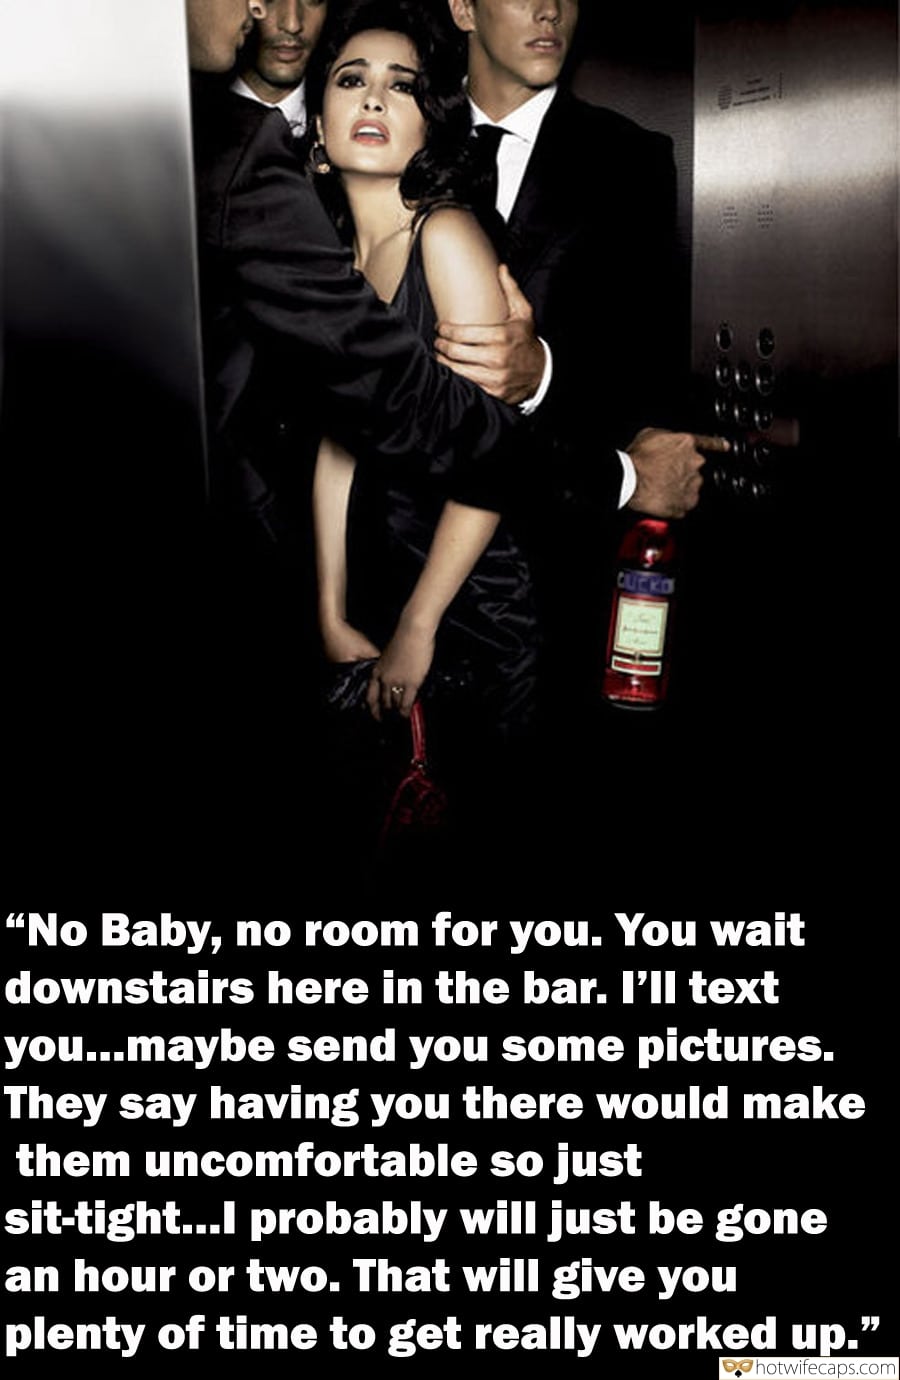 Sexy Memes Group Sex  hotwife caption: “No Baby, no room for you. You wait downstairs here in the bar. I’ll text you…maybe send you some pictures. They say having you there would make them uncomfortable so just sit-tight…I probably will just be gone an hour or...